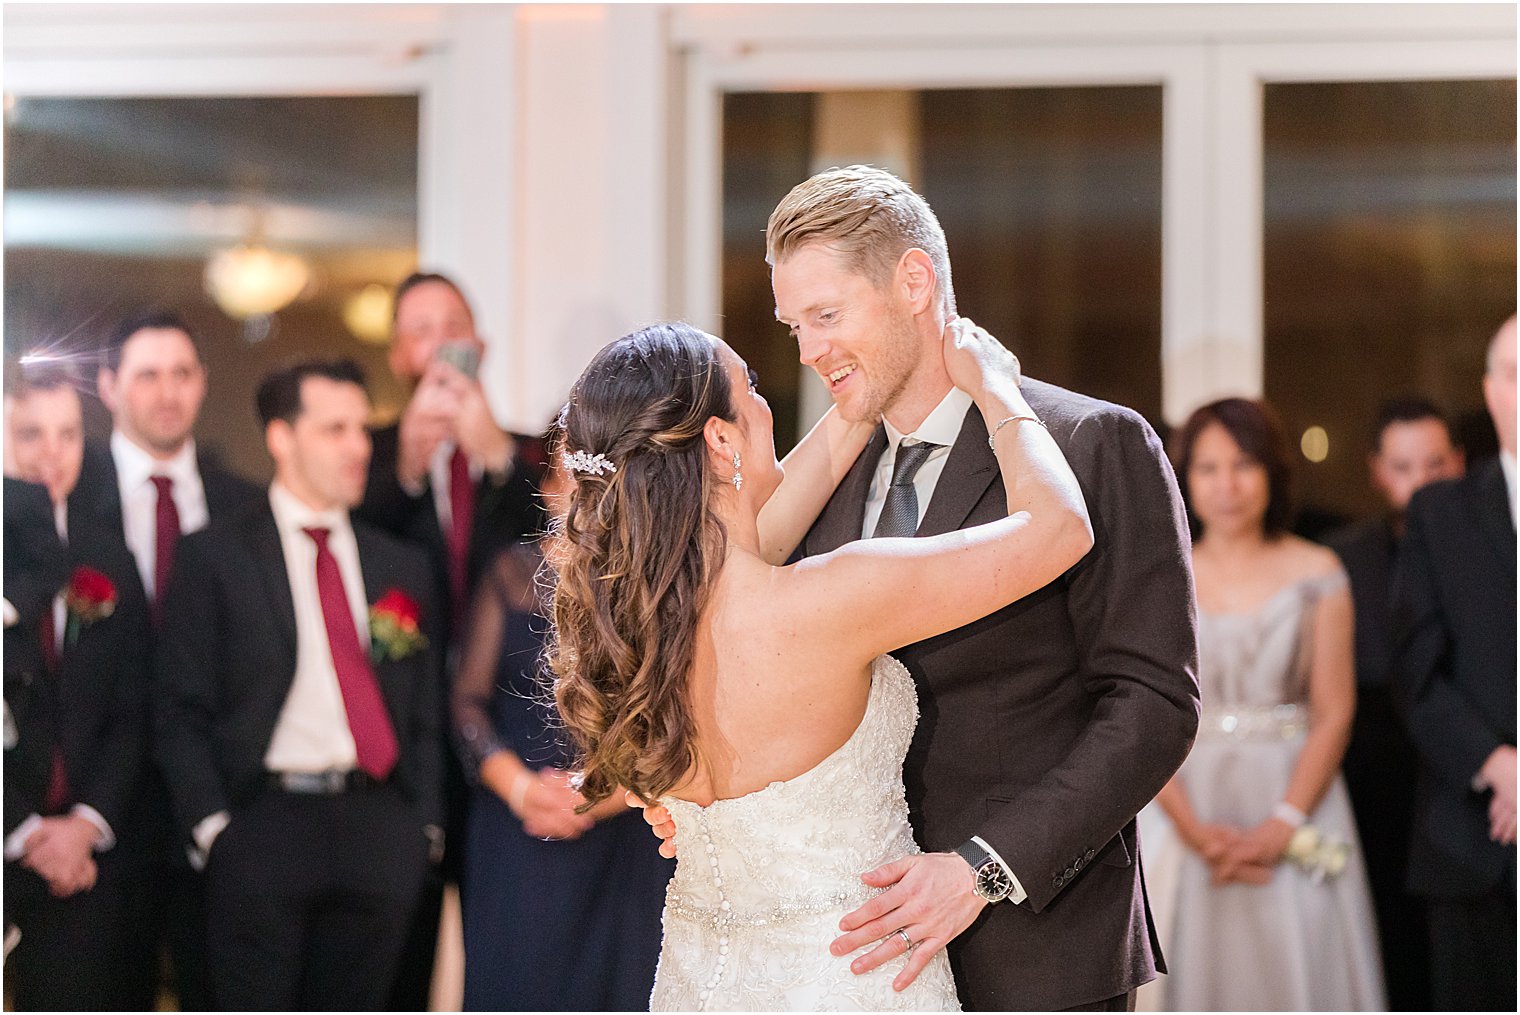 groom smiles at bride during first dance at NJ wedding reception